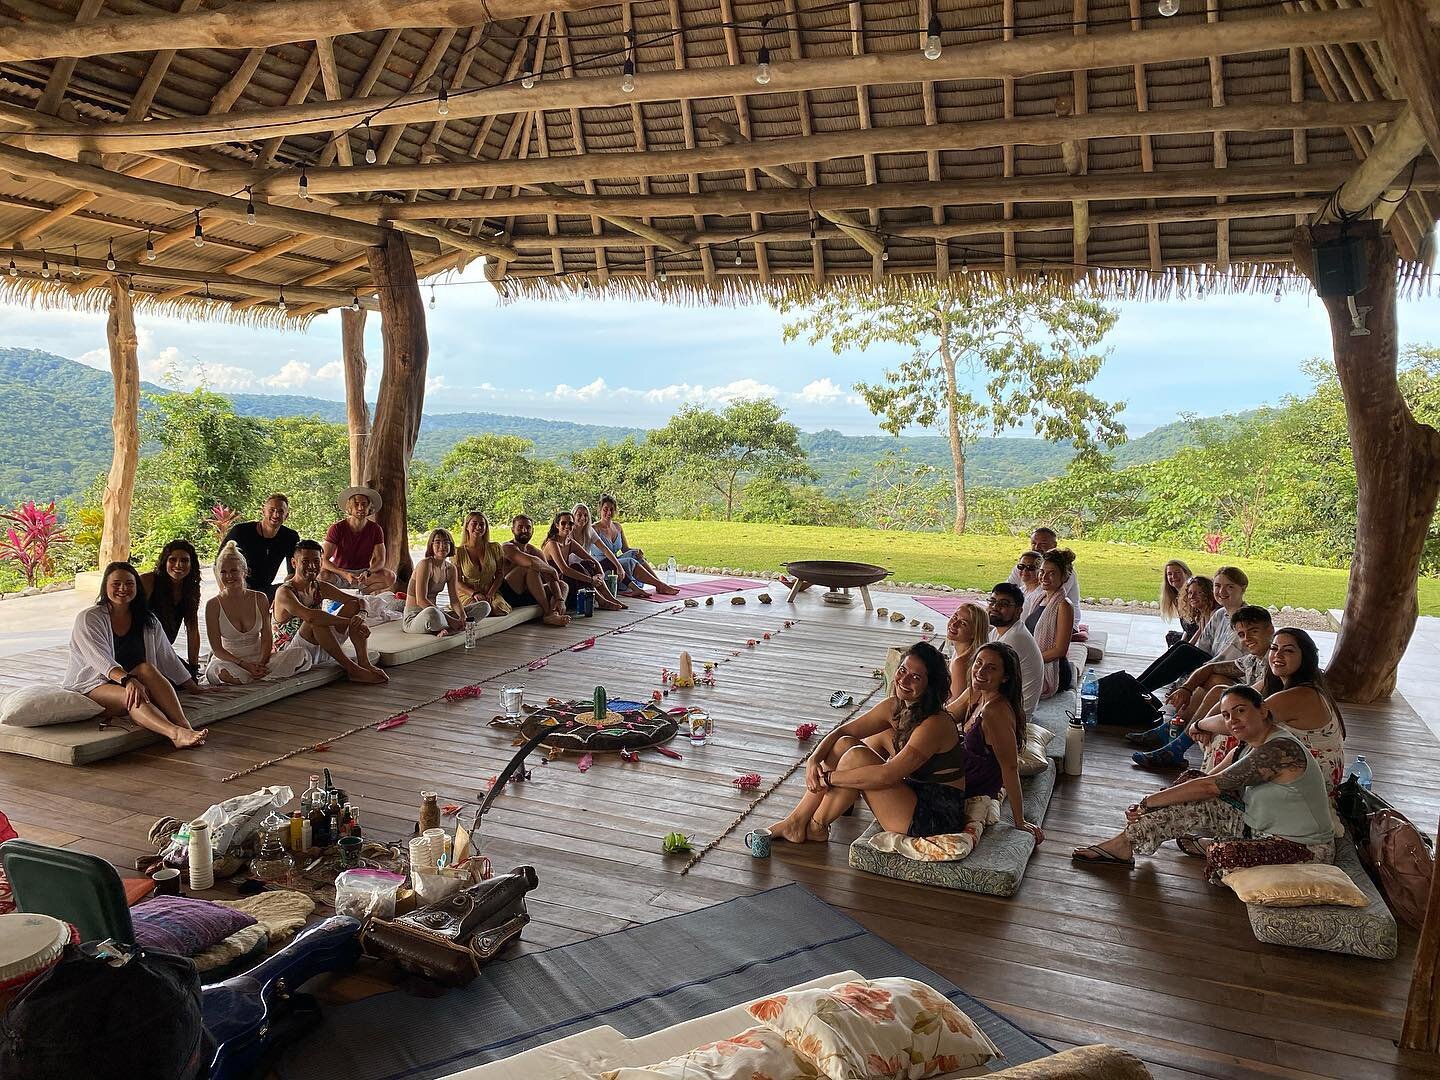 Costa Rica March 2022 - (Dates Announced)  Exciting news!

We will be taking applications 

for our next plant medicine retreat in Costa Rica very soon!

The Dates:

- March 28th - April 1st (4 nights)

Early next week... we'll share with you with al